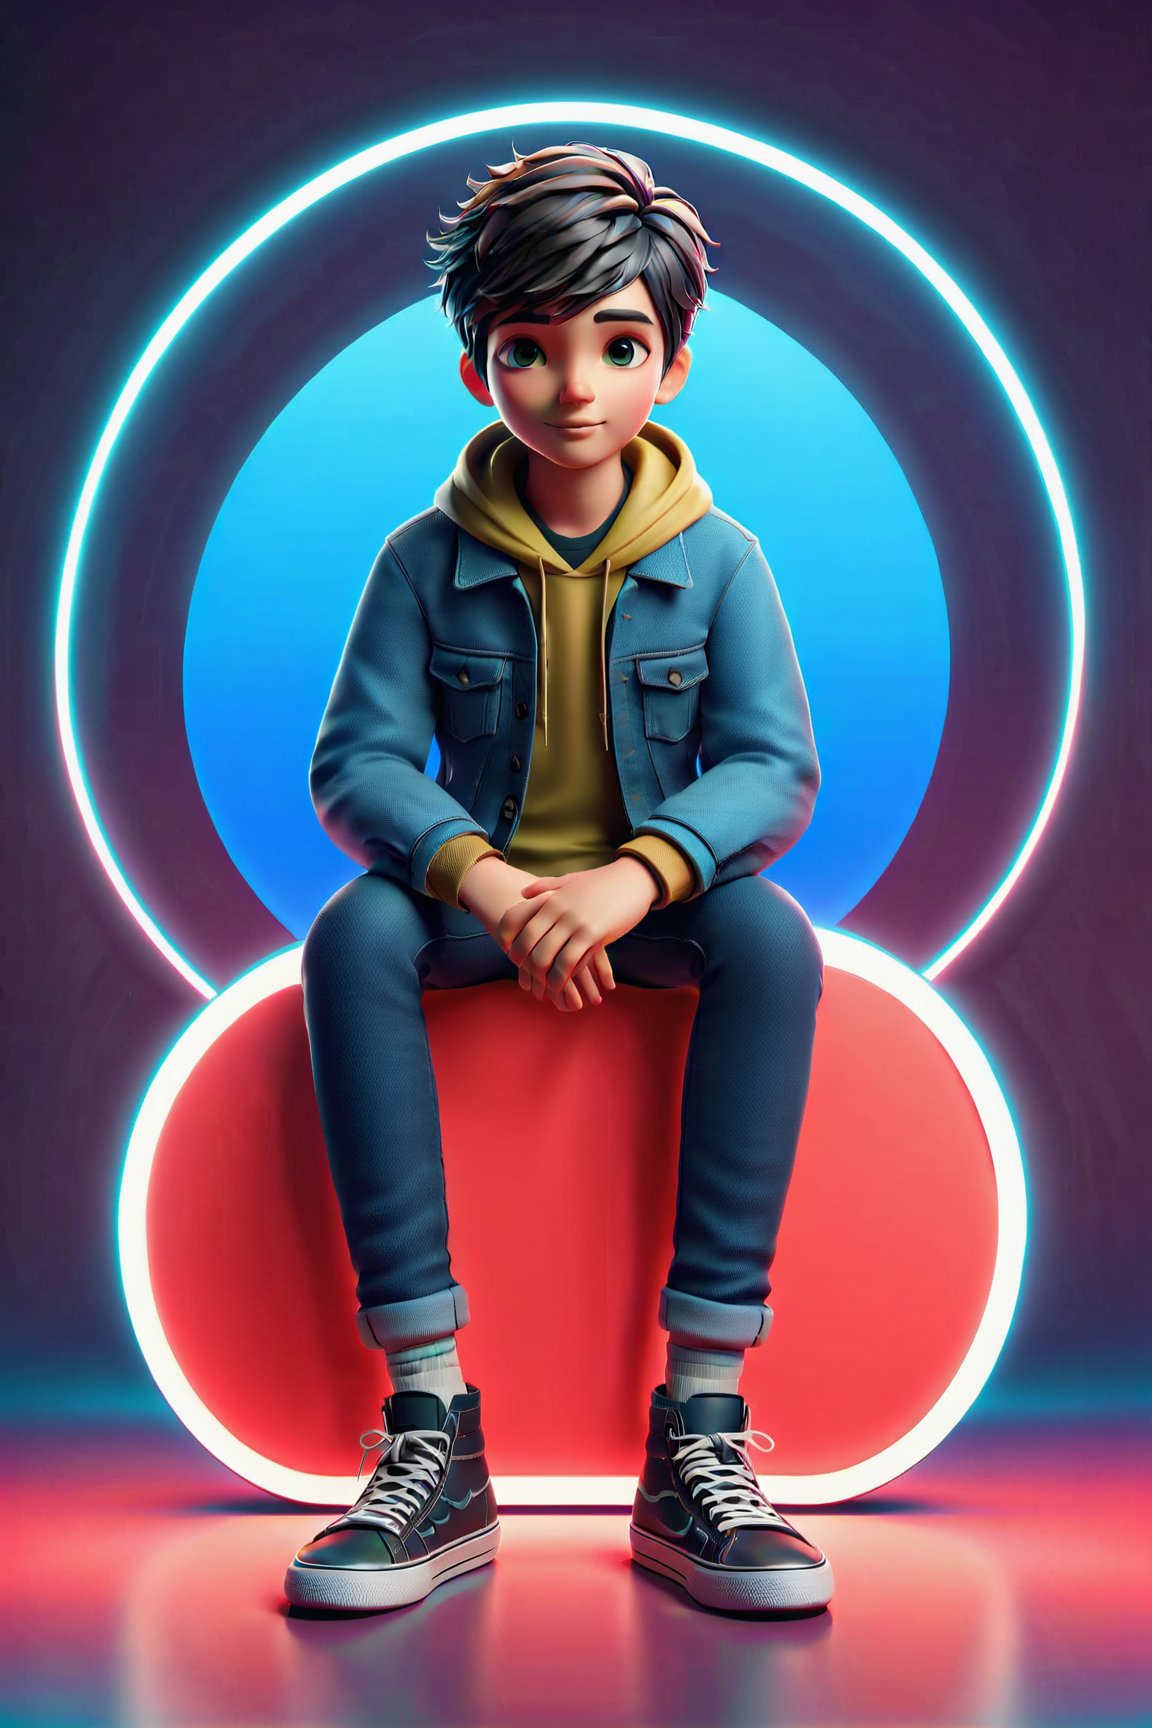 of a floating WhatsApp logo, surrounded by a colorful virtual reality background. The boy has a mischievous smile on his face and is wearing a trendy outfit with headphones around his neck. The logo is made of reflective material, giving it a futuristic and shiny appearance. The virtual reality background consists of vibrant neon lights, abstract shapes, and digital landscapes, creating a sense of energy and excitement. The image is of the highest quality, with ultra-detailed textures and realistic lighting. The artwork has a modern and digital art style, combining elements of illustration and 3D rendering. The color palette is bold and vibrant, with a mix of bright neon colors and deep shadows. The lighting is dynamic, with rays of light casting dramatic shadows and creating a sense of depth and movement in the image.